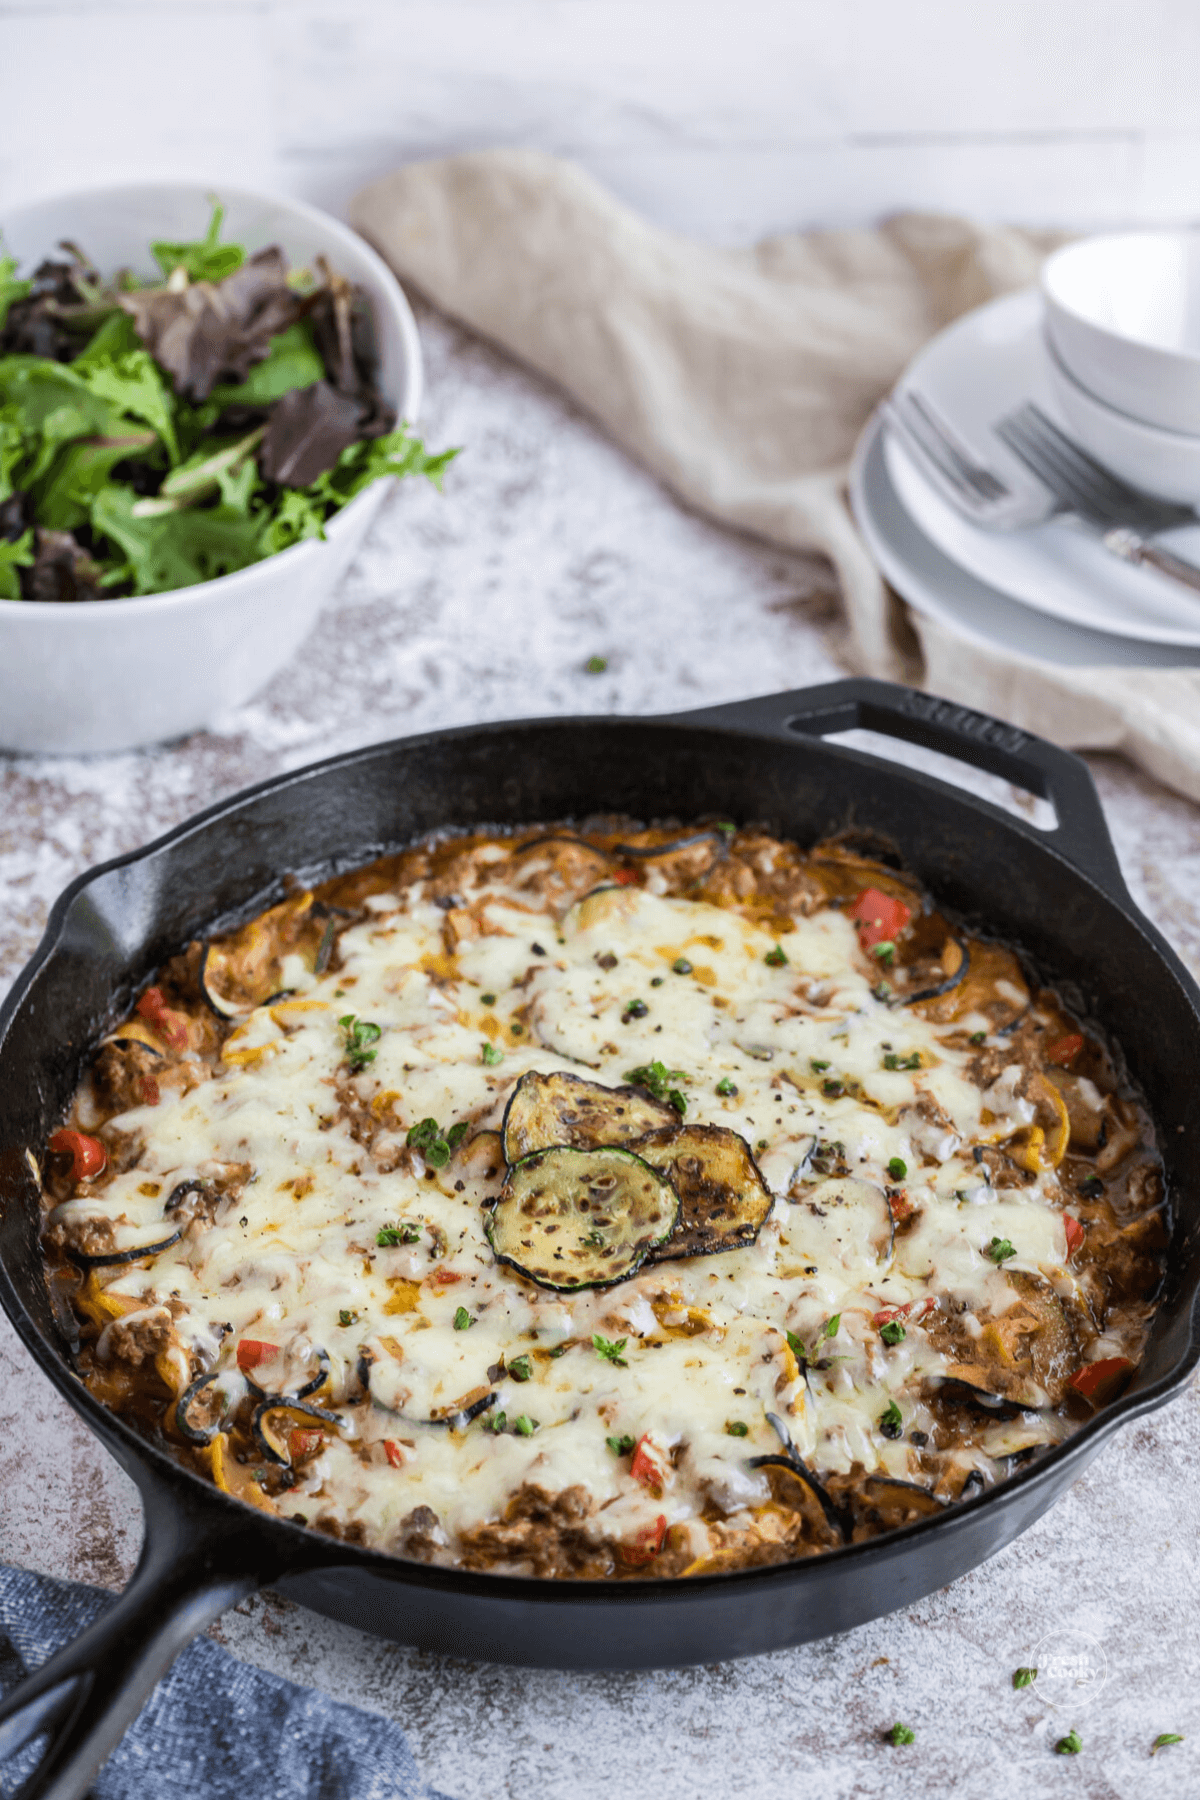 Skillet filled with ground beef and zucchini casserole.